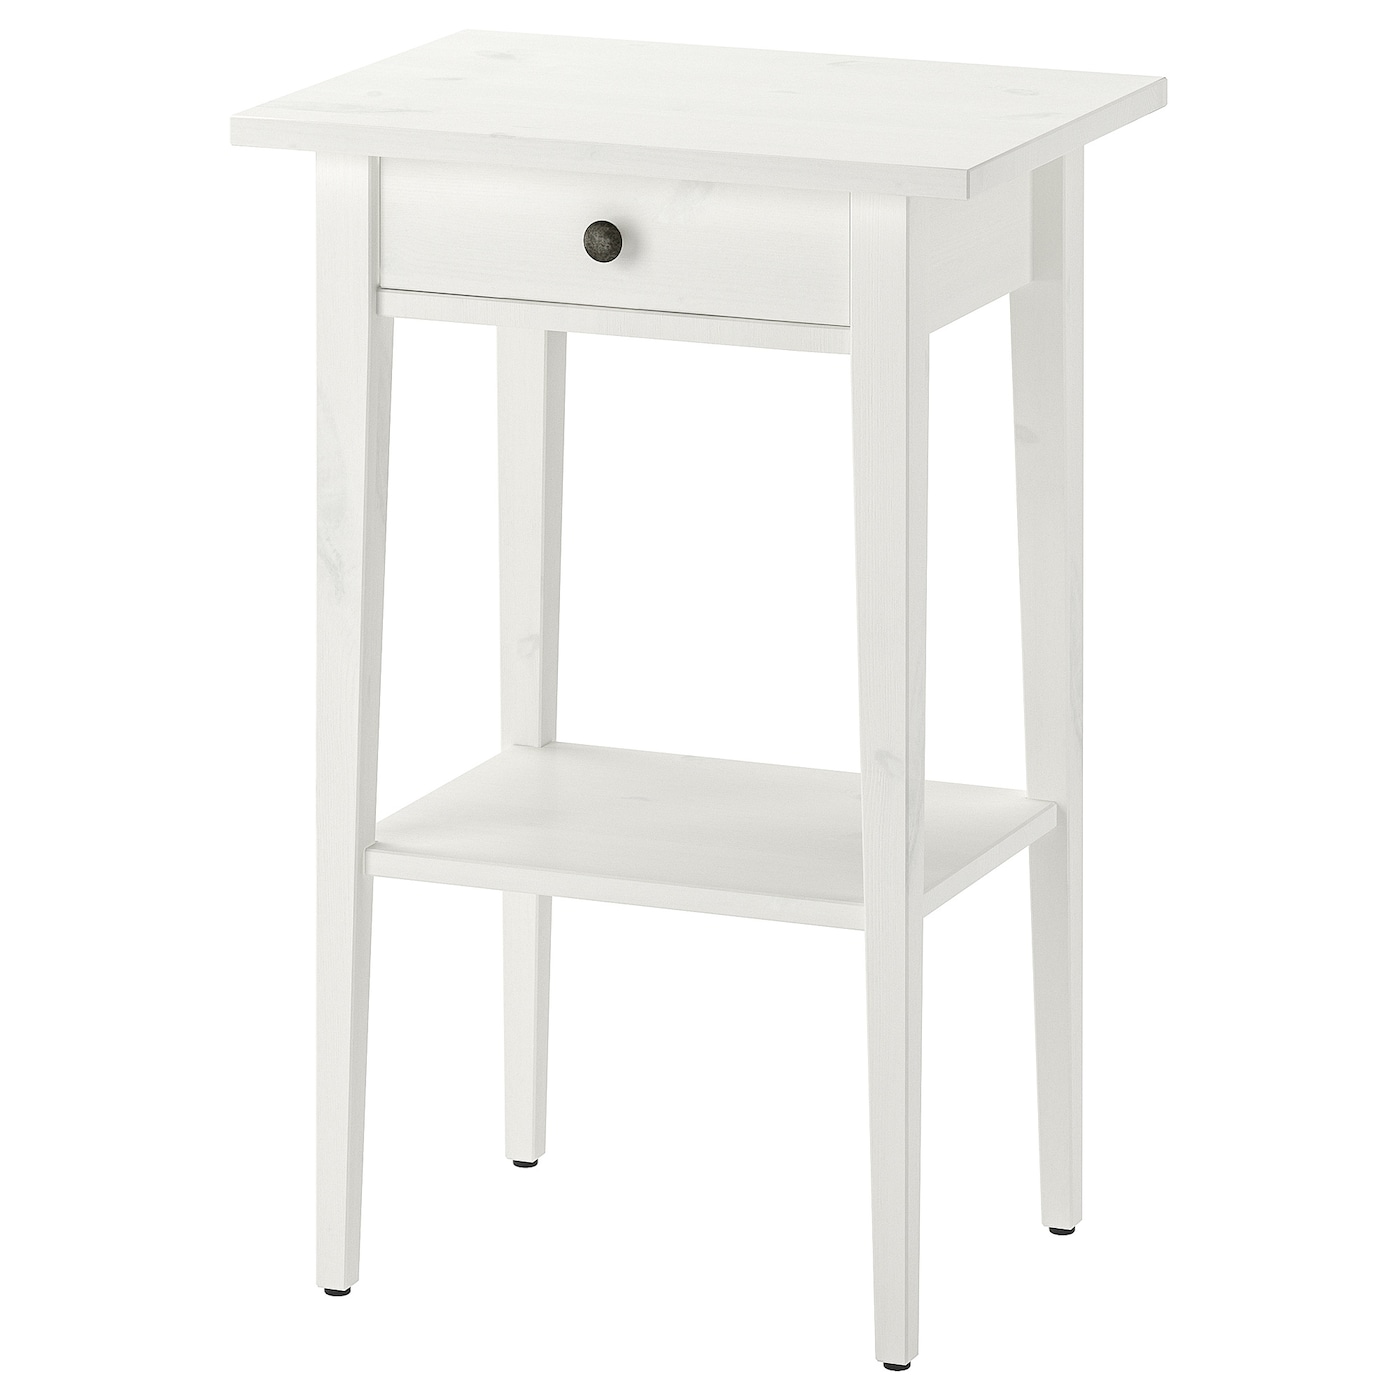 Ikea Hemnes Bedside table in white stain